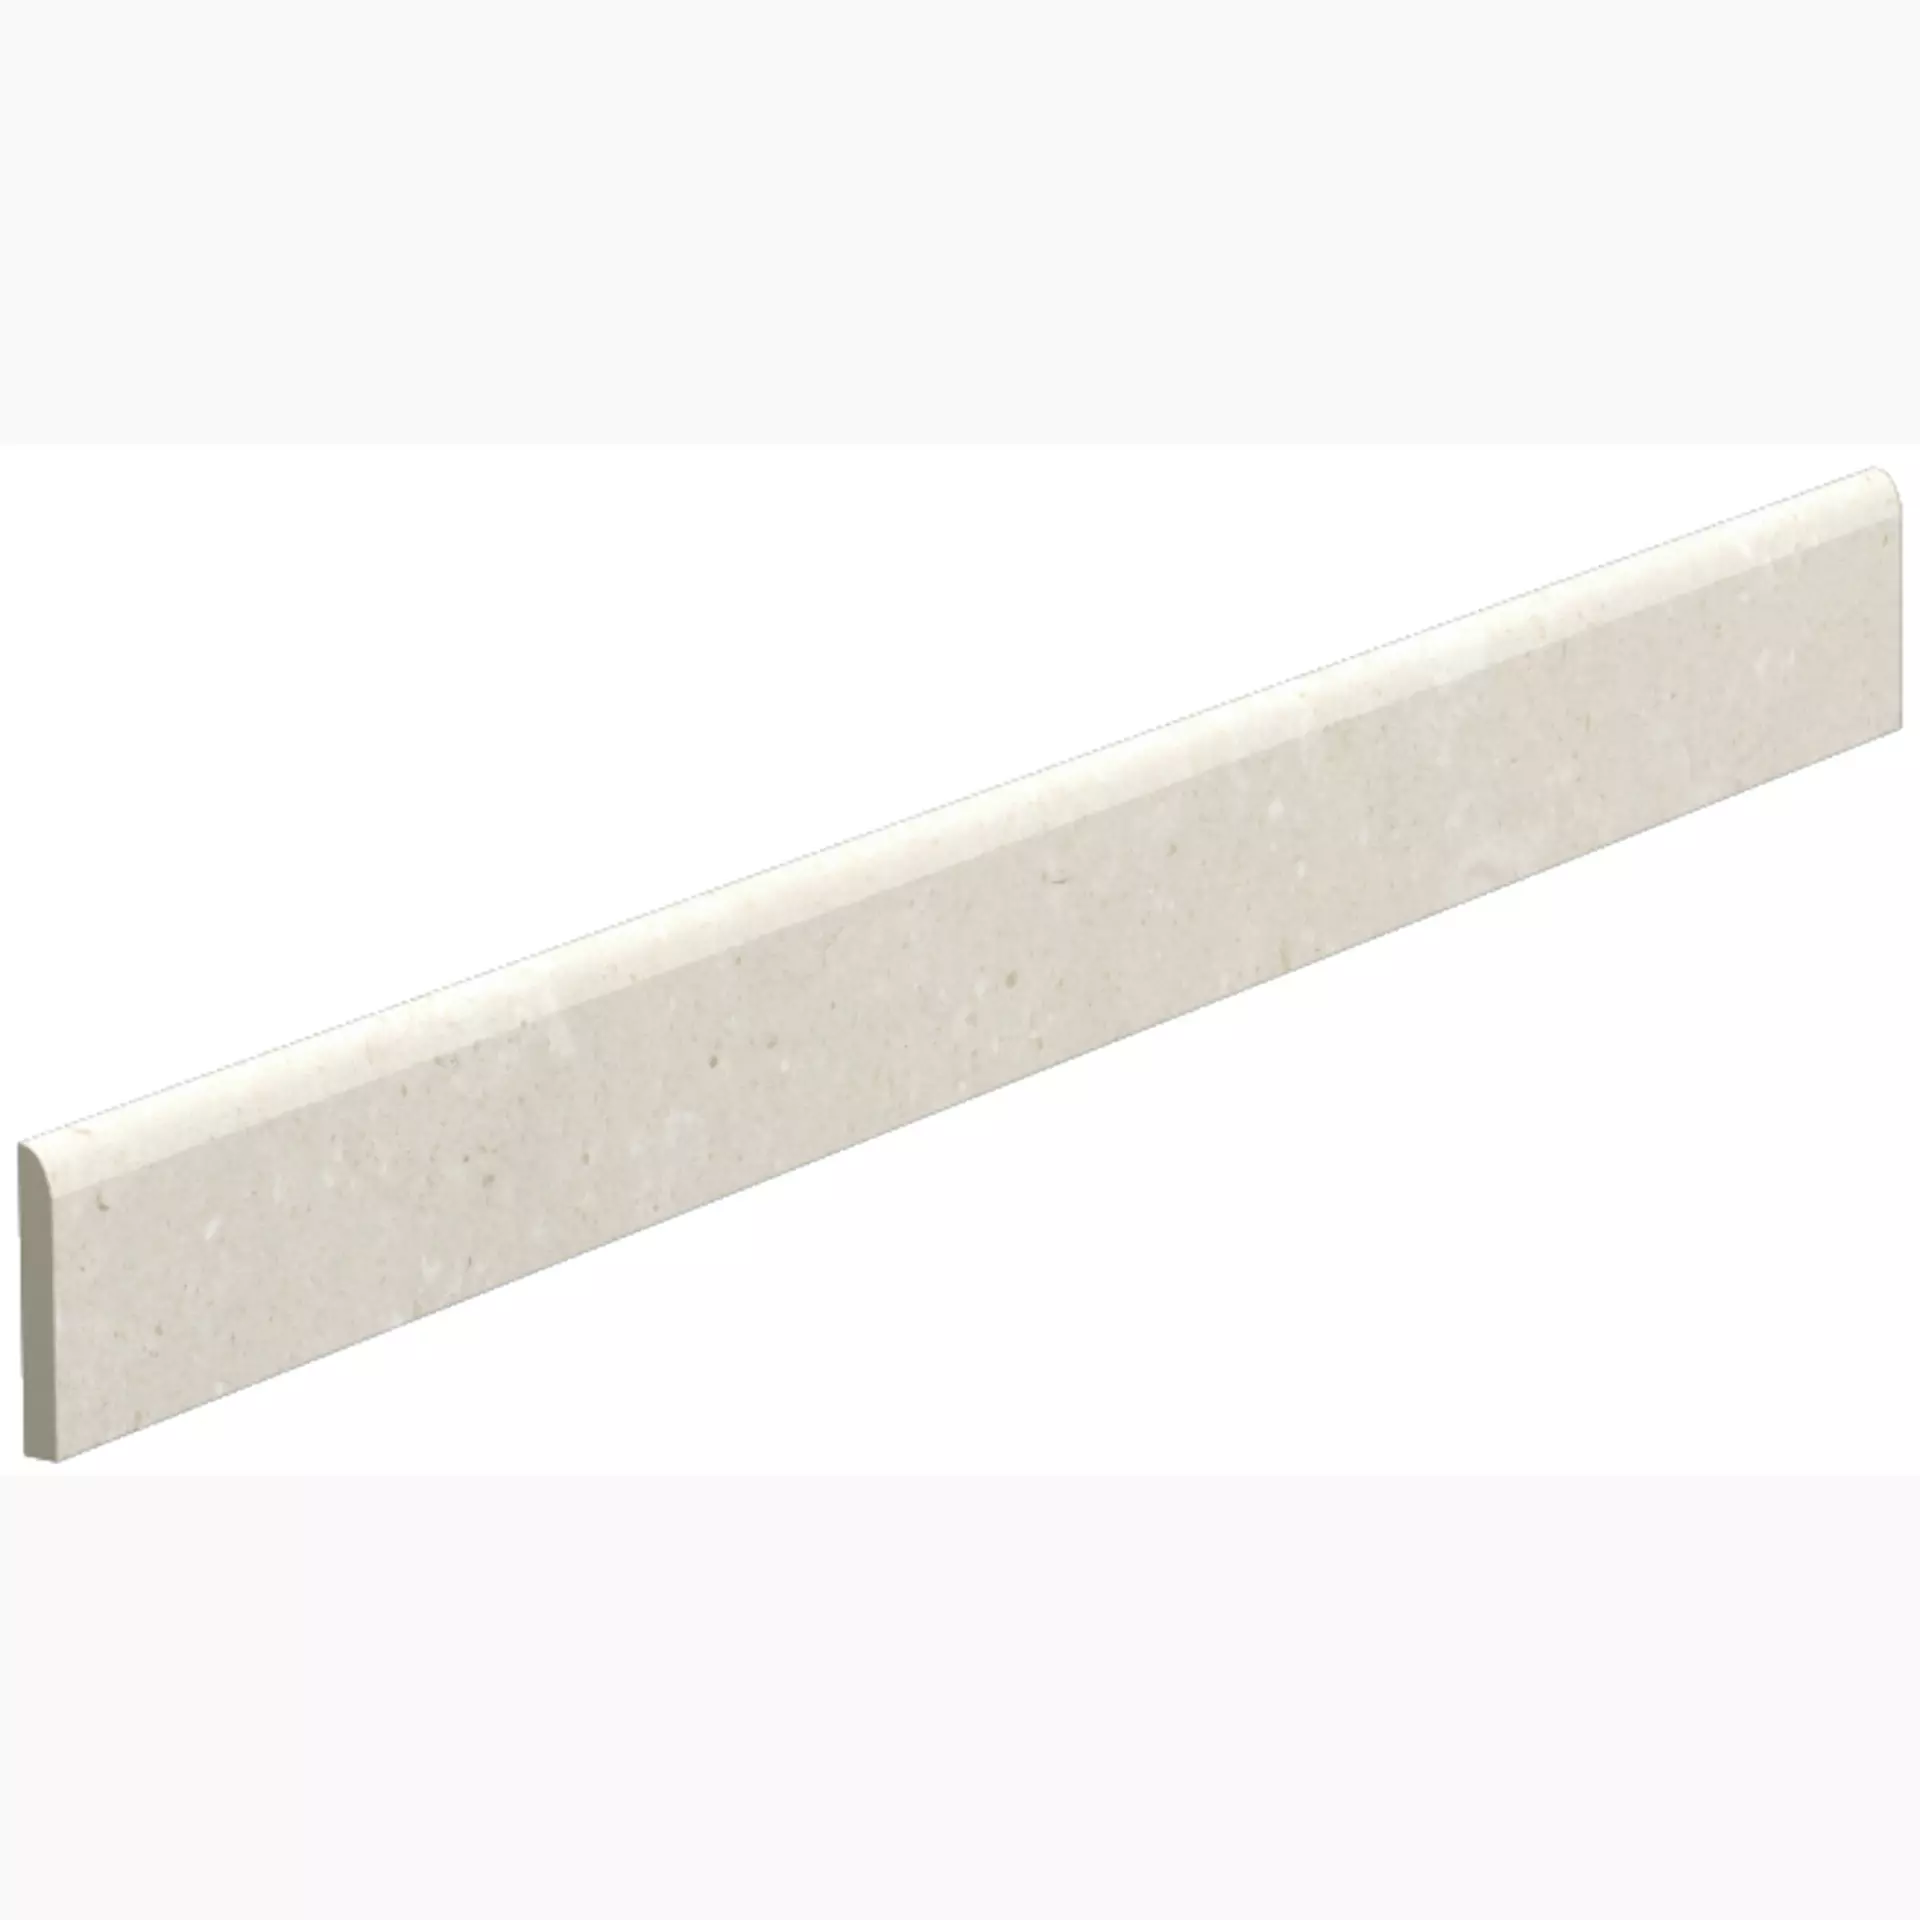 Del Conca Hwd Wild White Hwd10 Naturale Skirting board G0WD10R80 7x80cm rectified 8,5mm